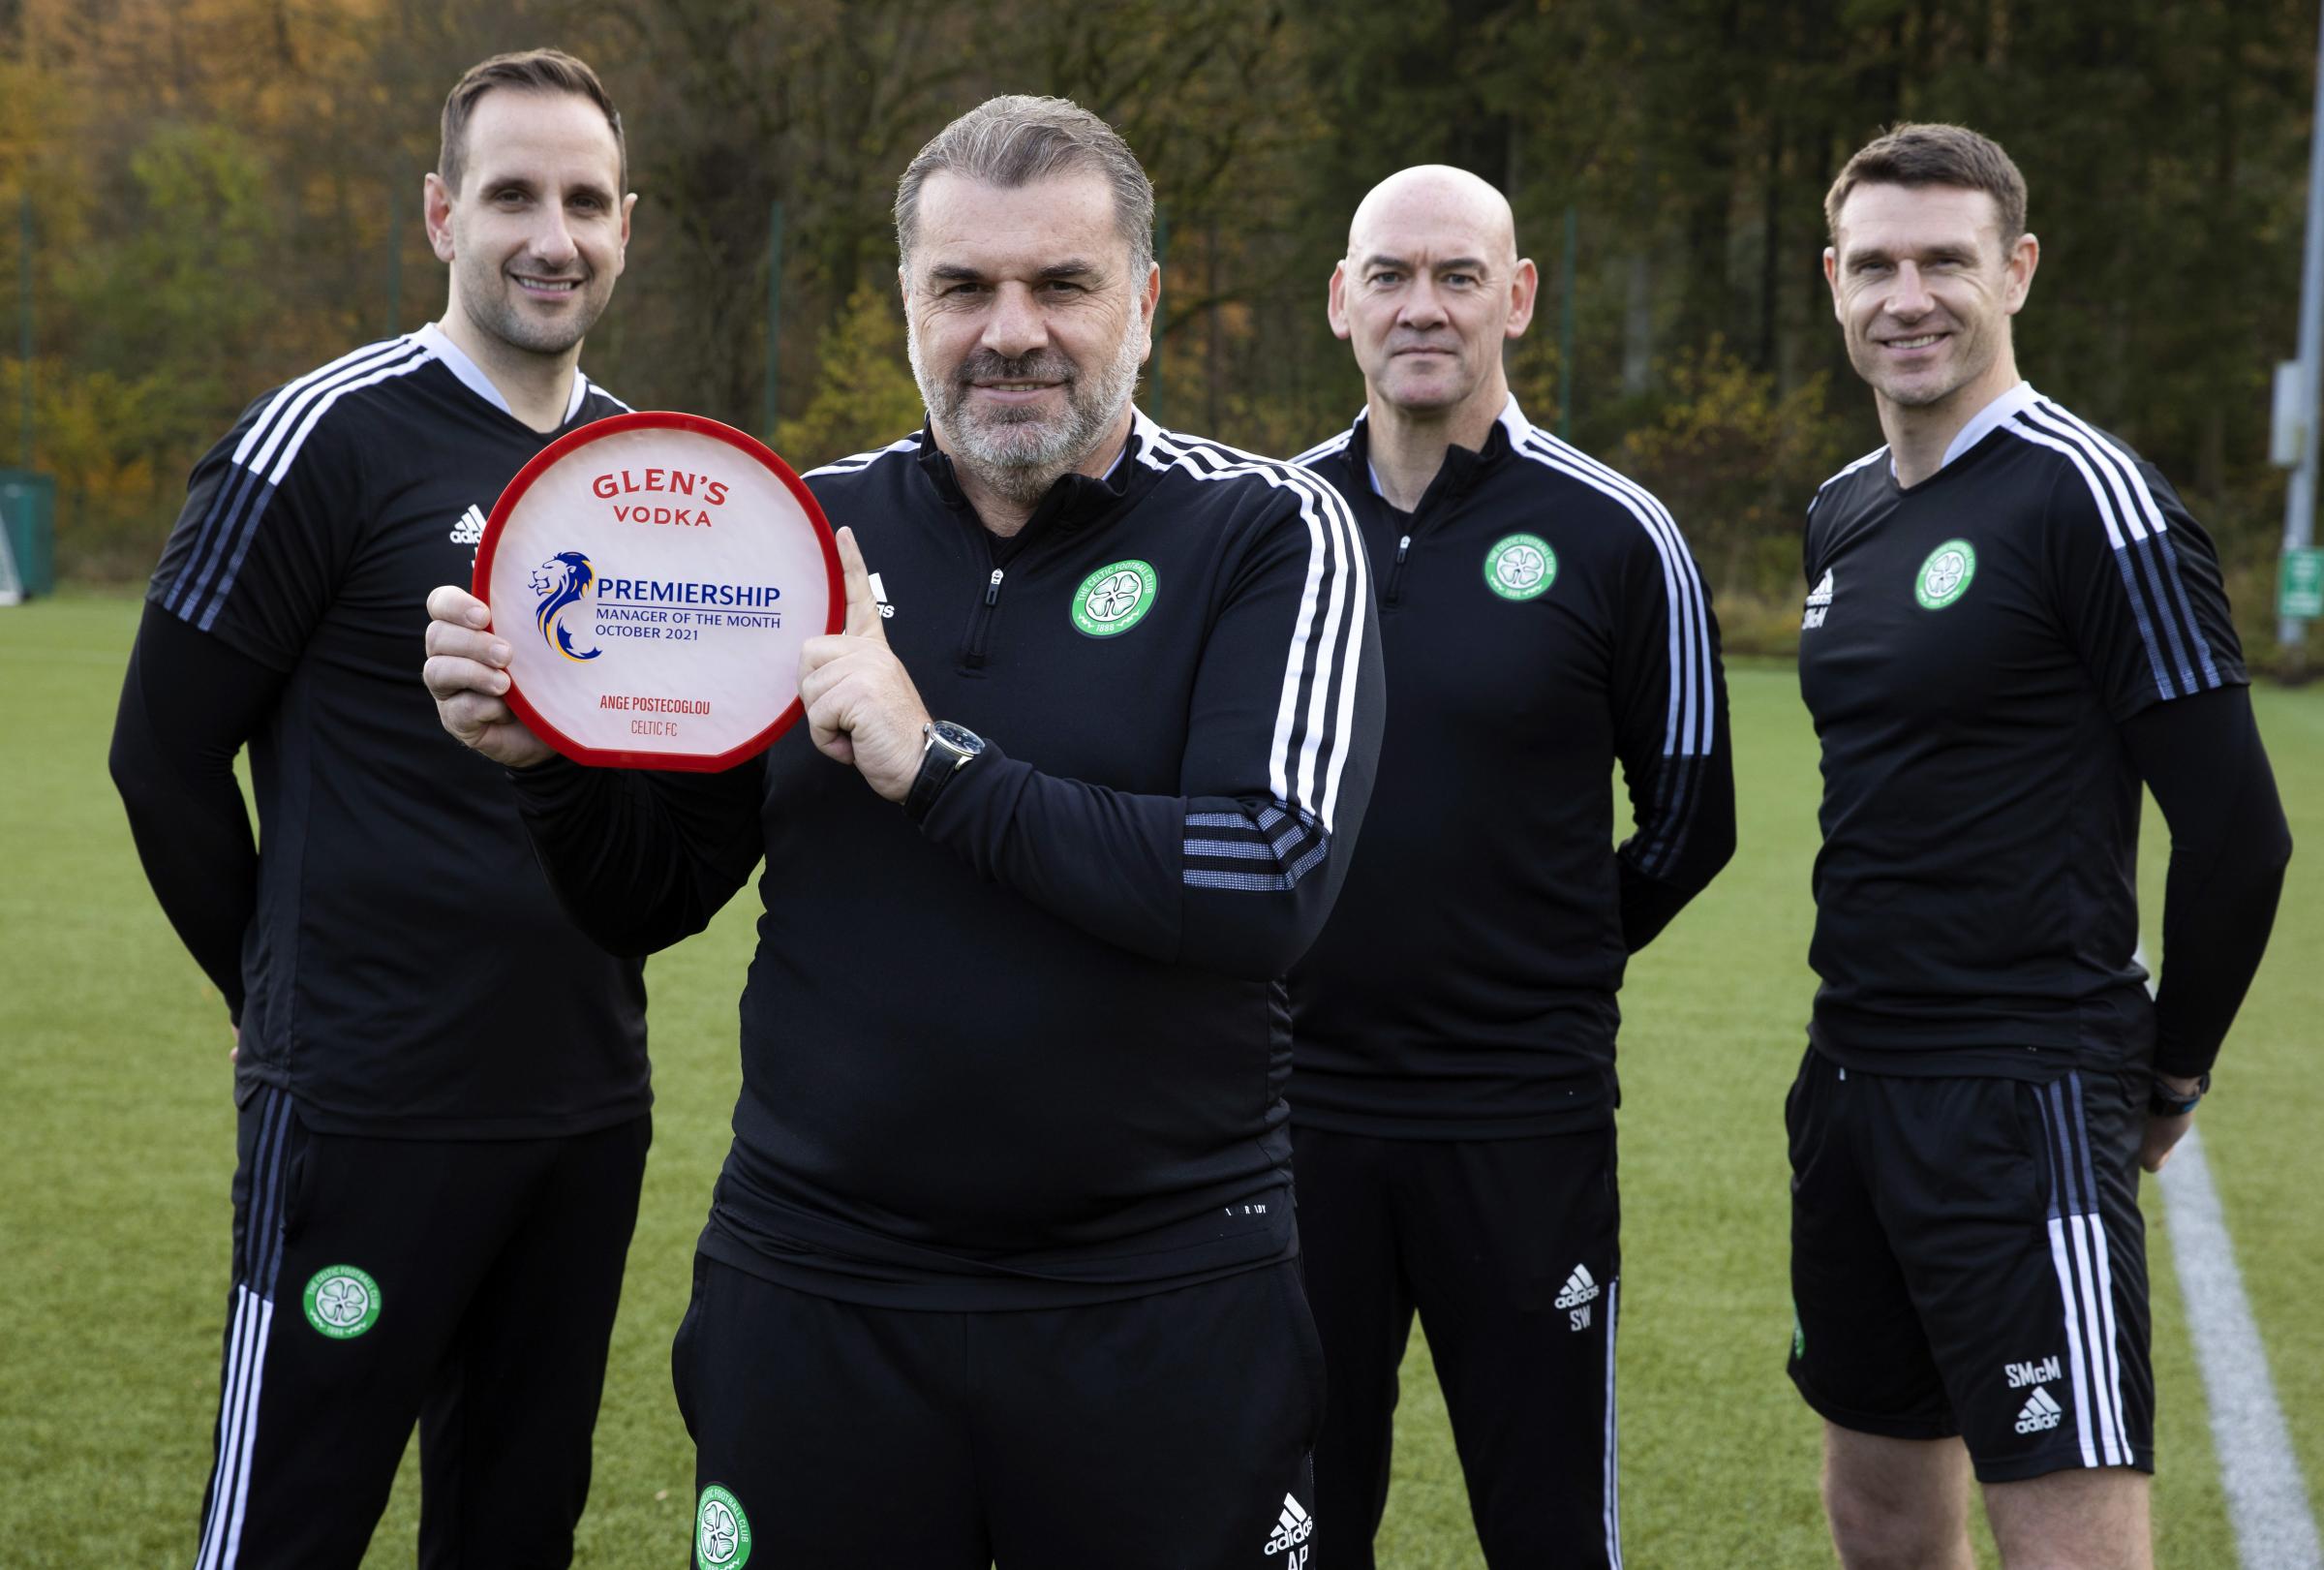 Celtic manager Ange Postecoglou on Scottish football's 'binge-watching' culture, collective effort, and playing the long game